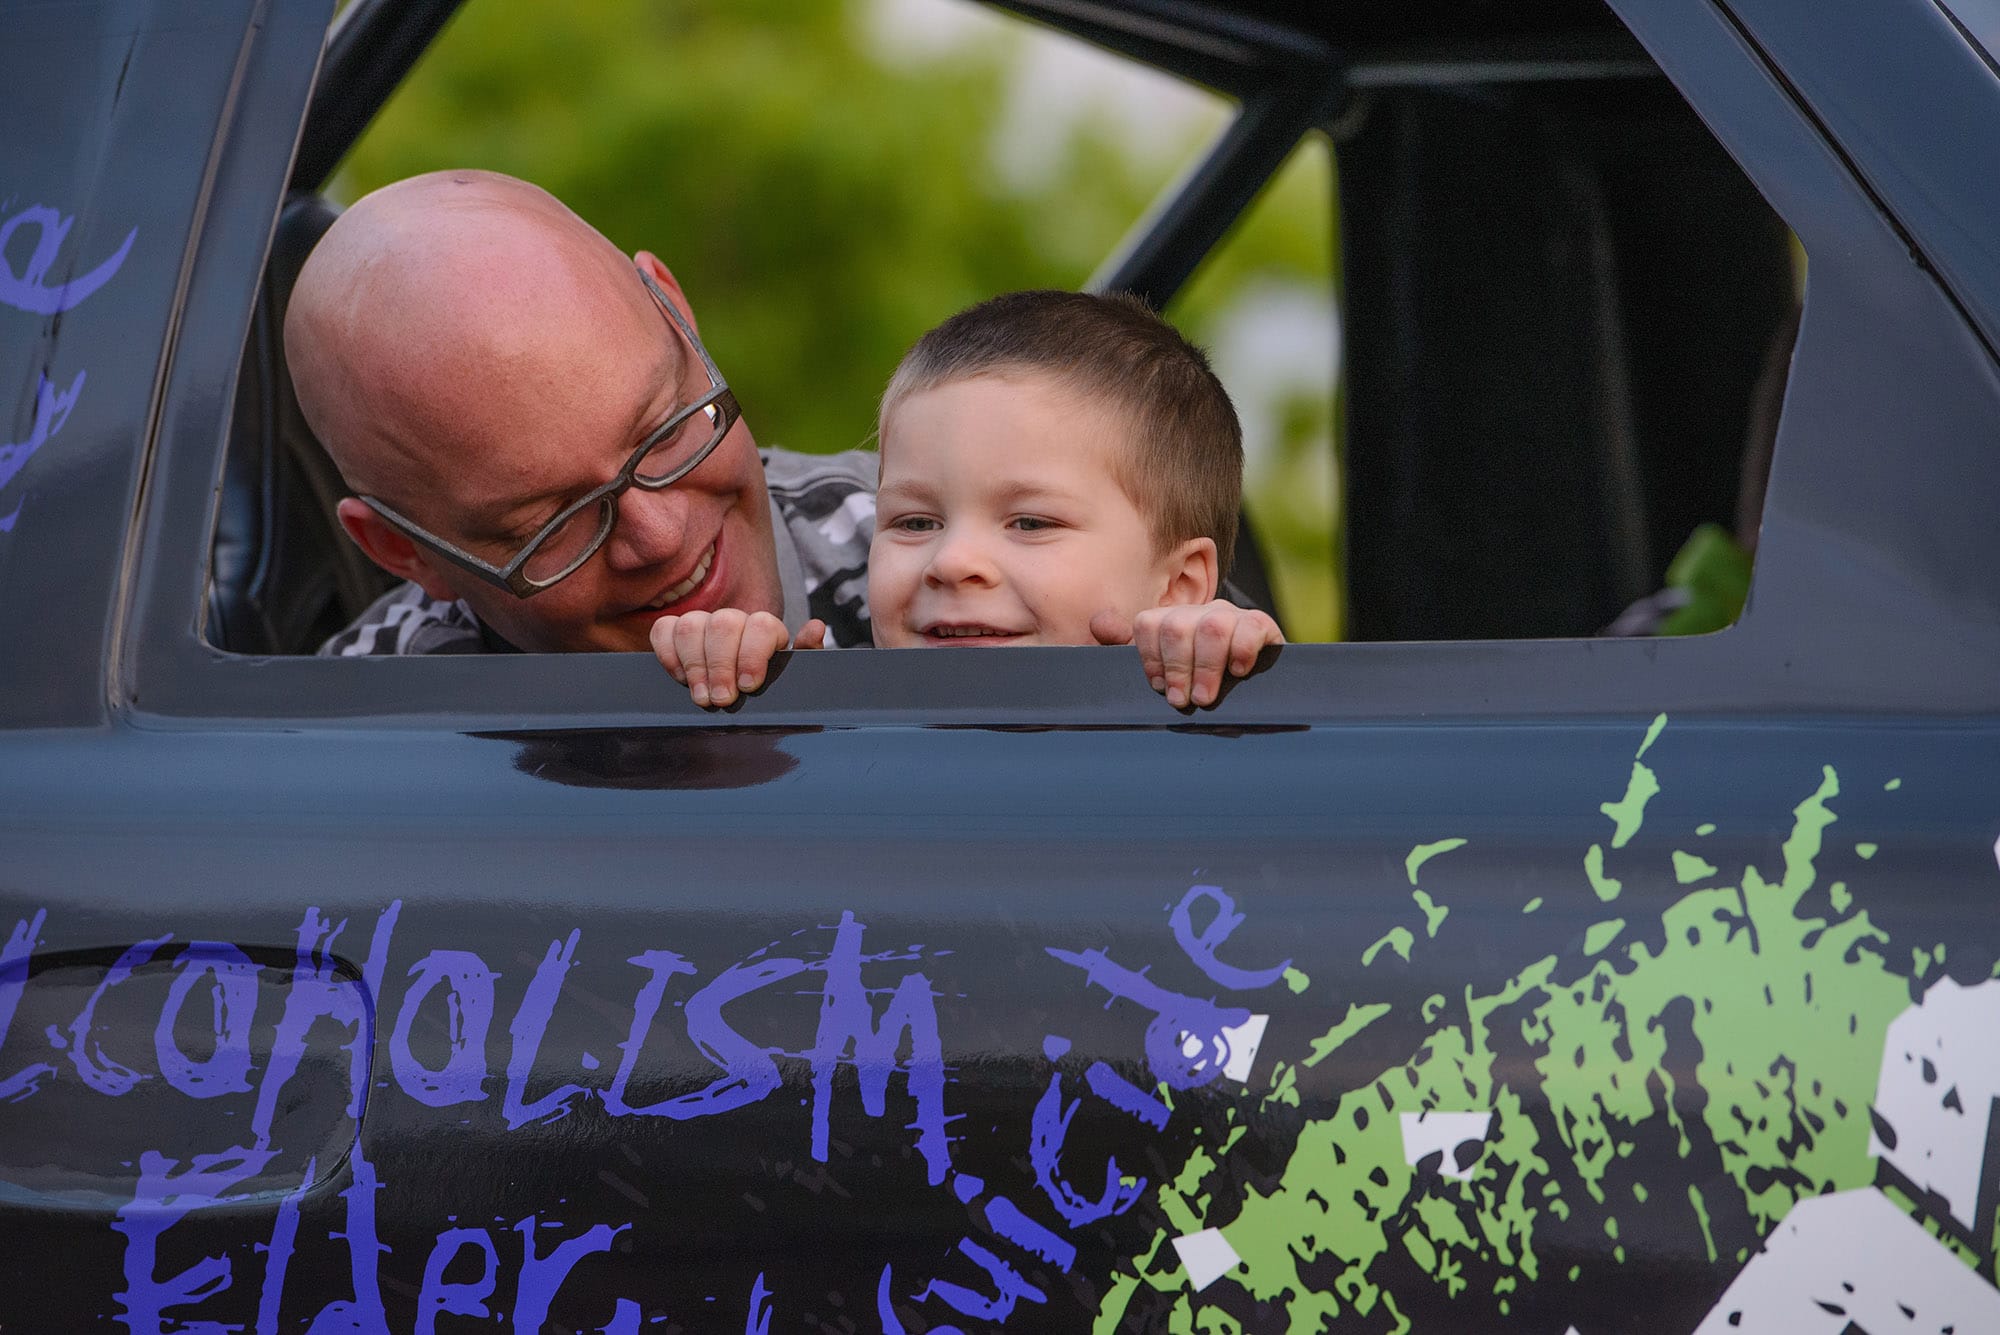 Gideon Janku, 4, sits in a monster truck with his dad, Scott Janku, during a special car show organized just for him May 16 in the East Vancouver Home Depot parking lot.